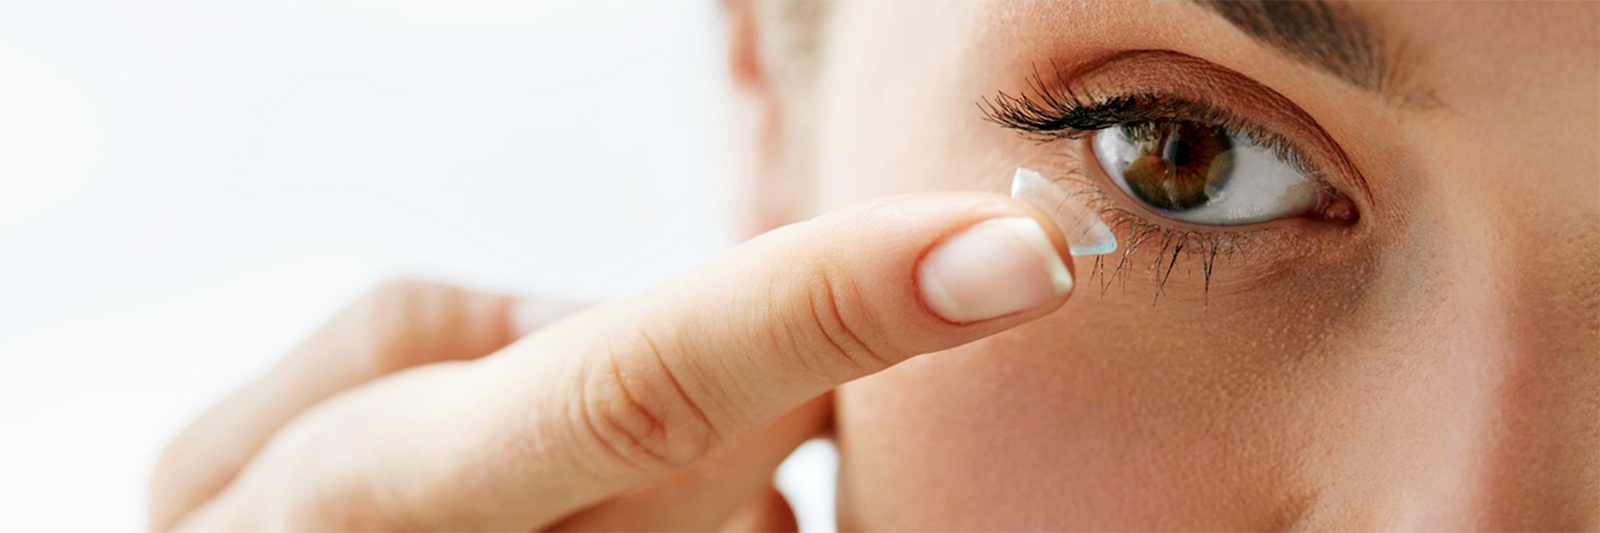 Quality Contact Lenses by Contact Lens Technicians in Penticton, BC